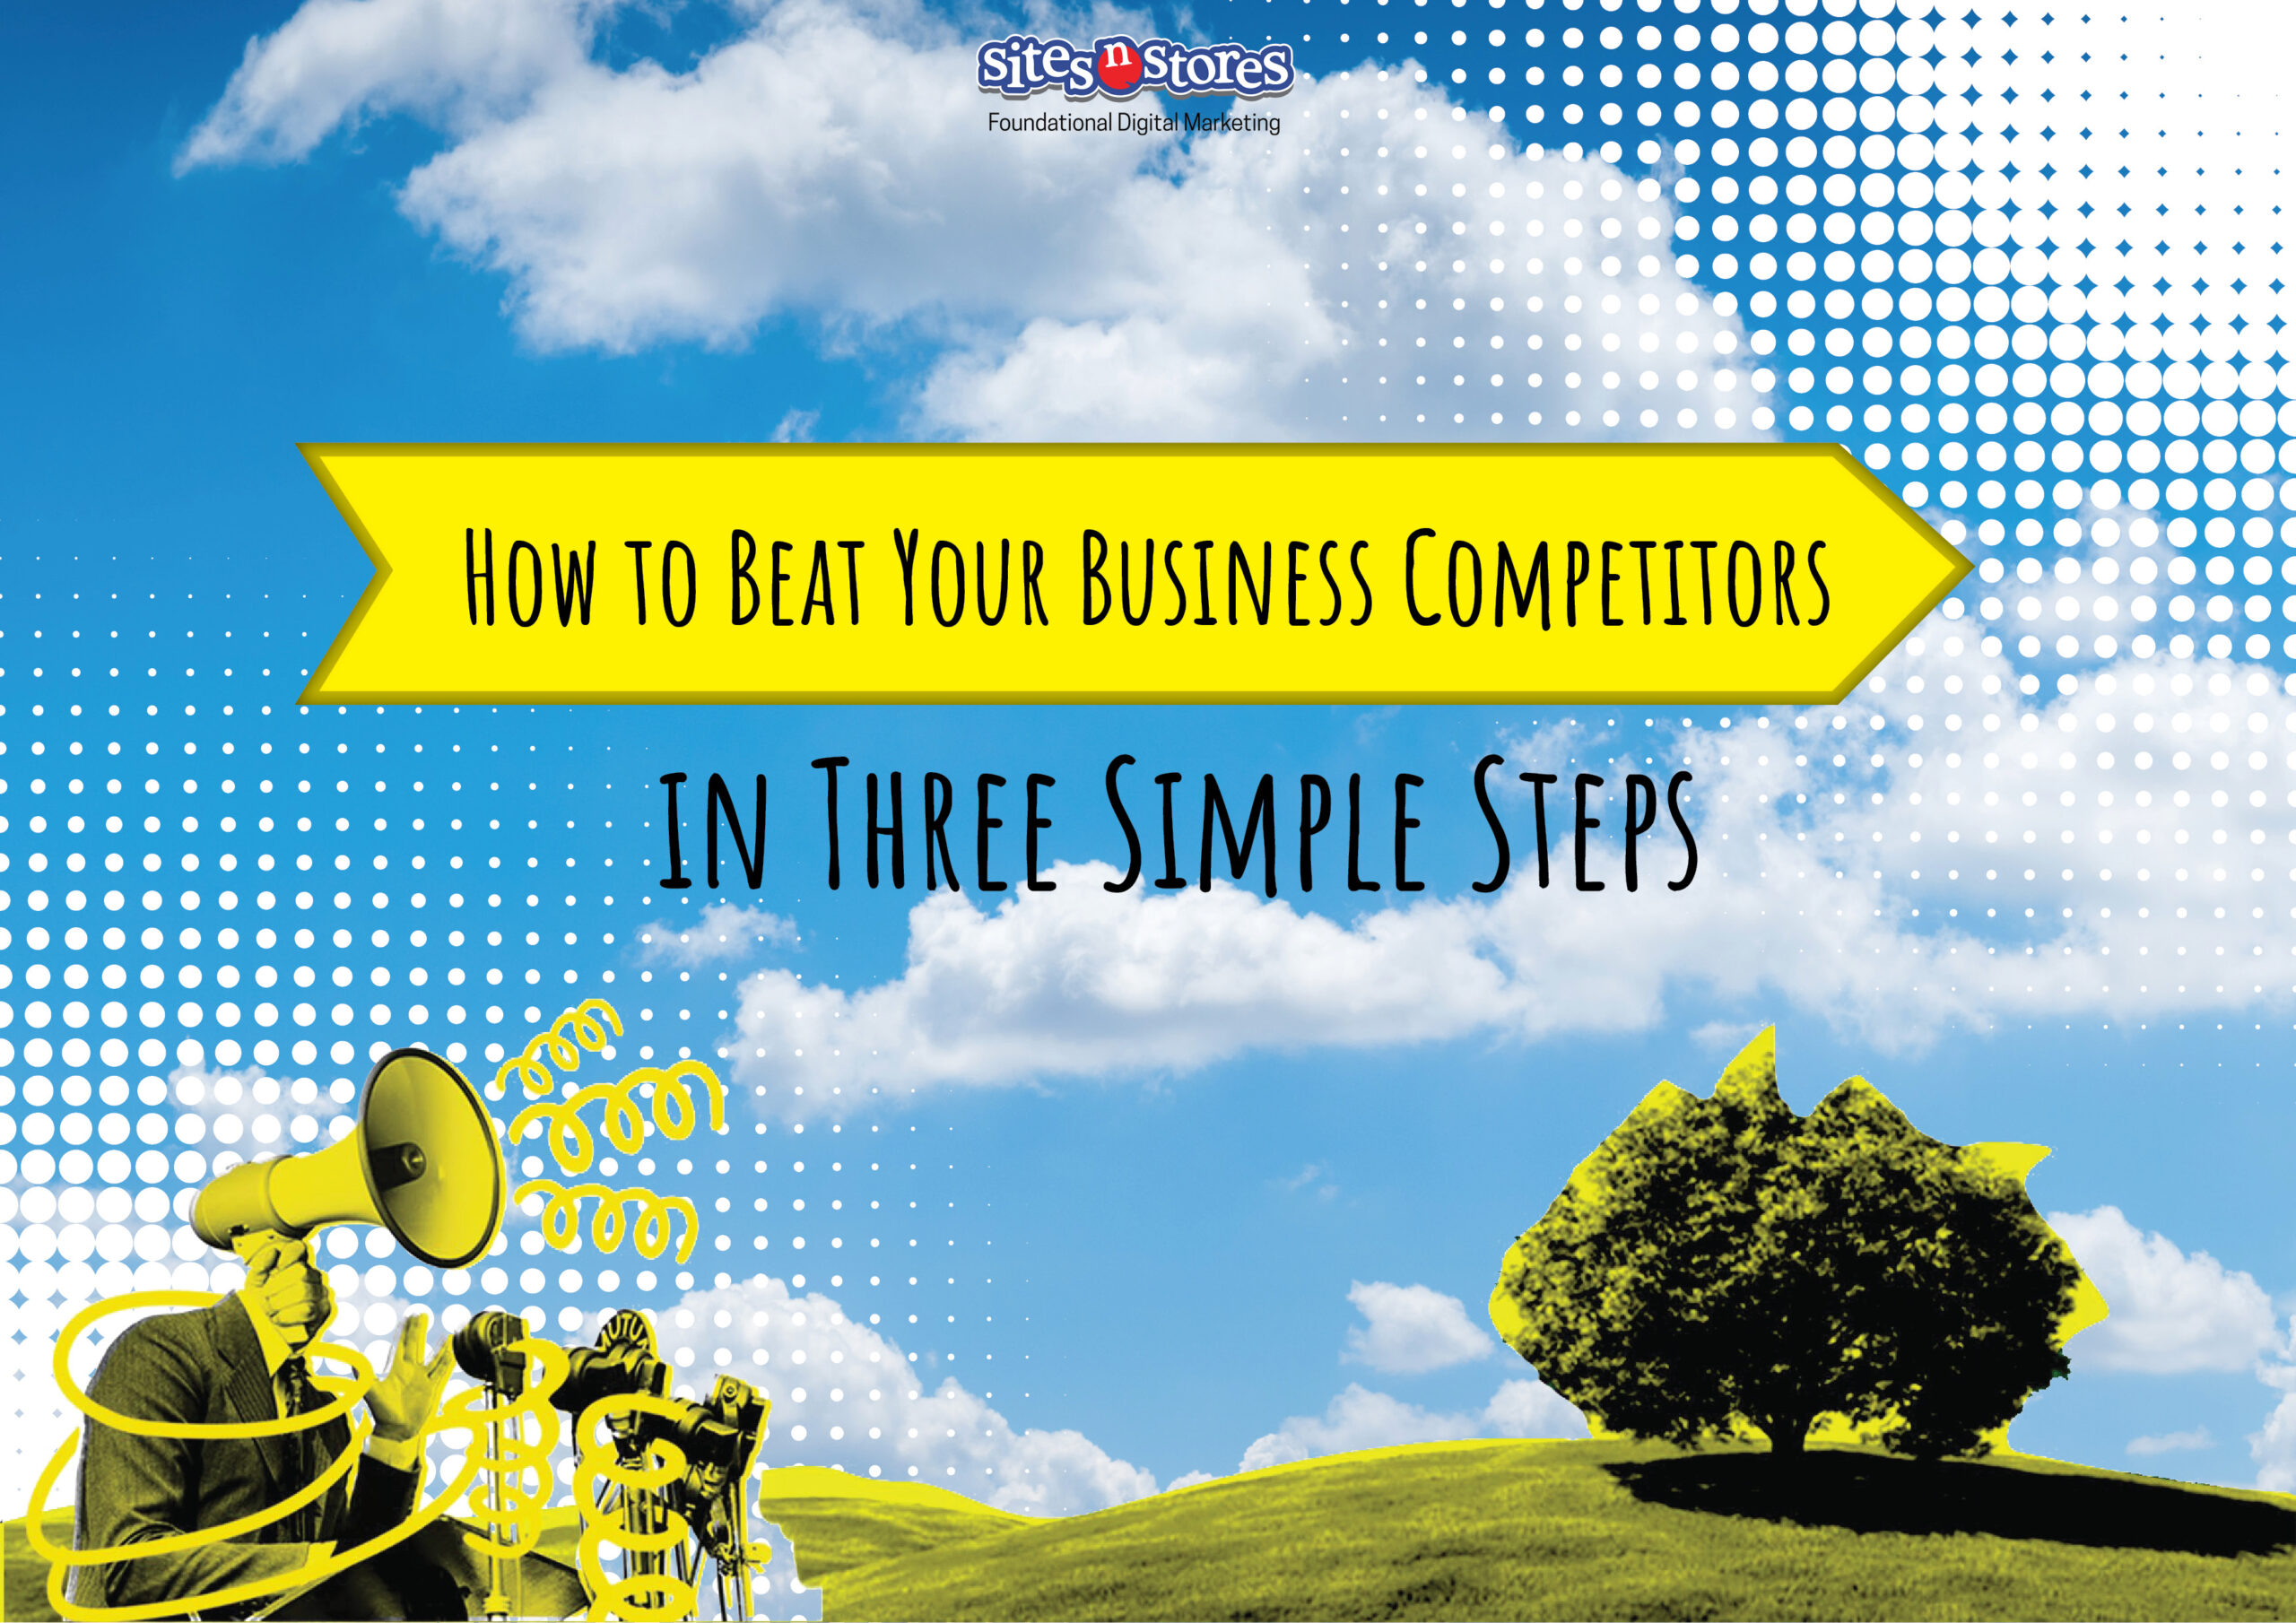 How to Beat Your Business Competitors in Three Simple Steps